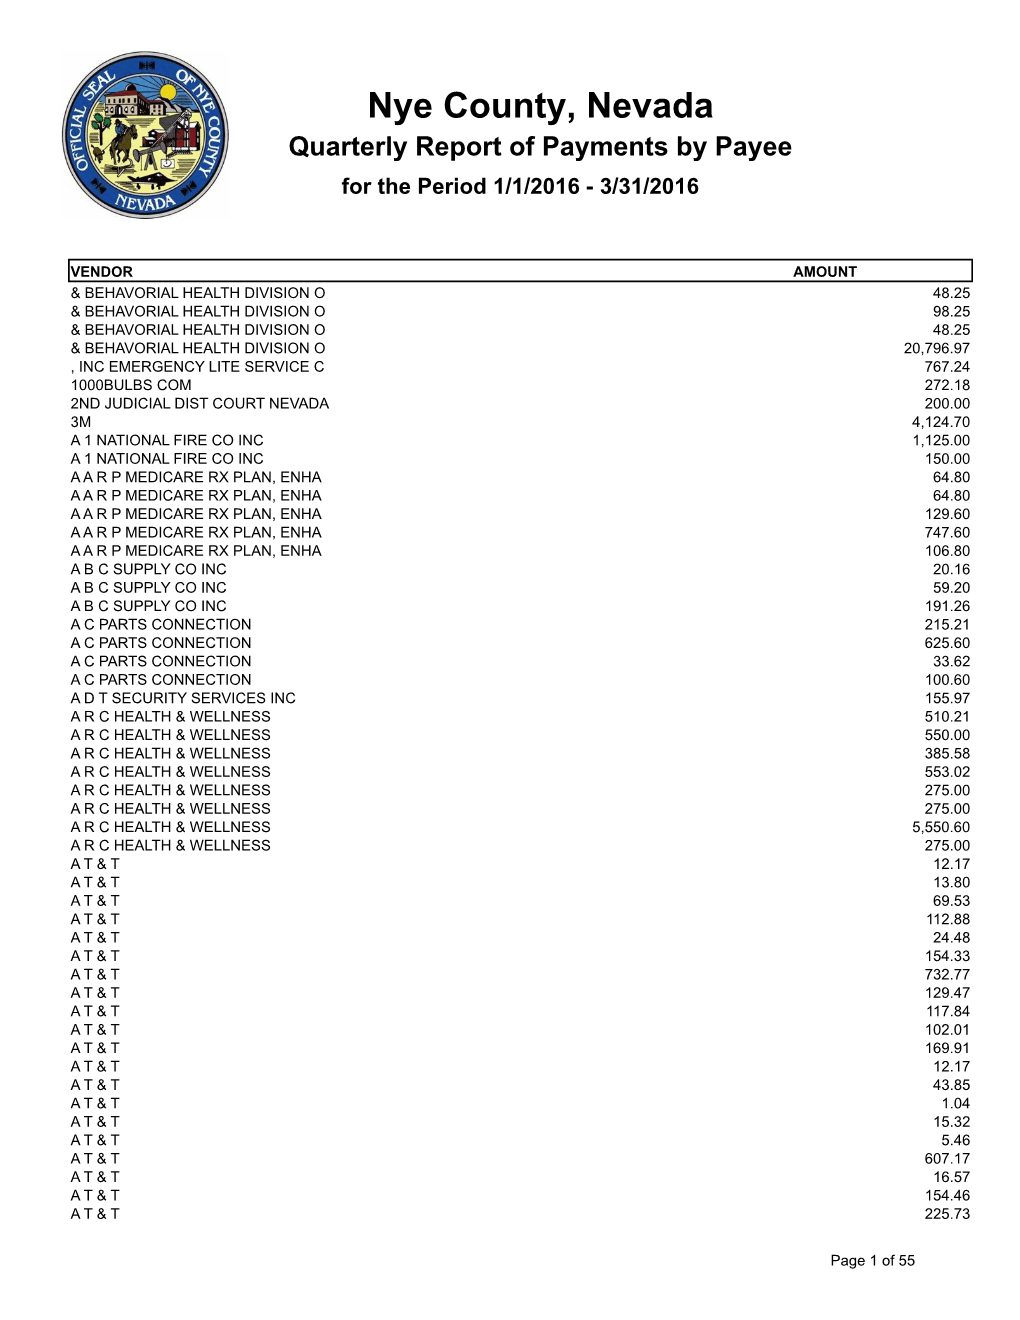 Nye County, Nevada Quarterly Report of Payments by Payee for the Period 1/1/2016 - 3/31/2016